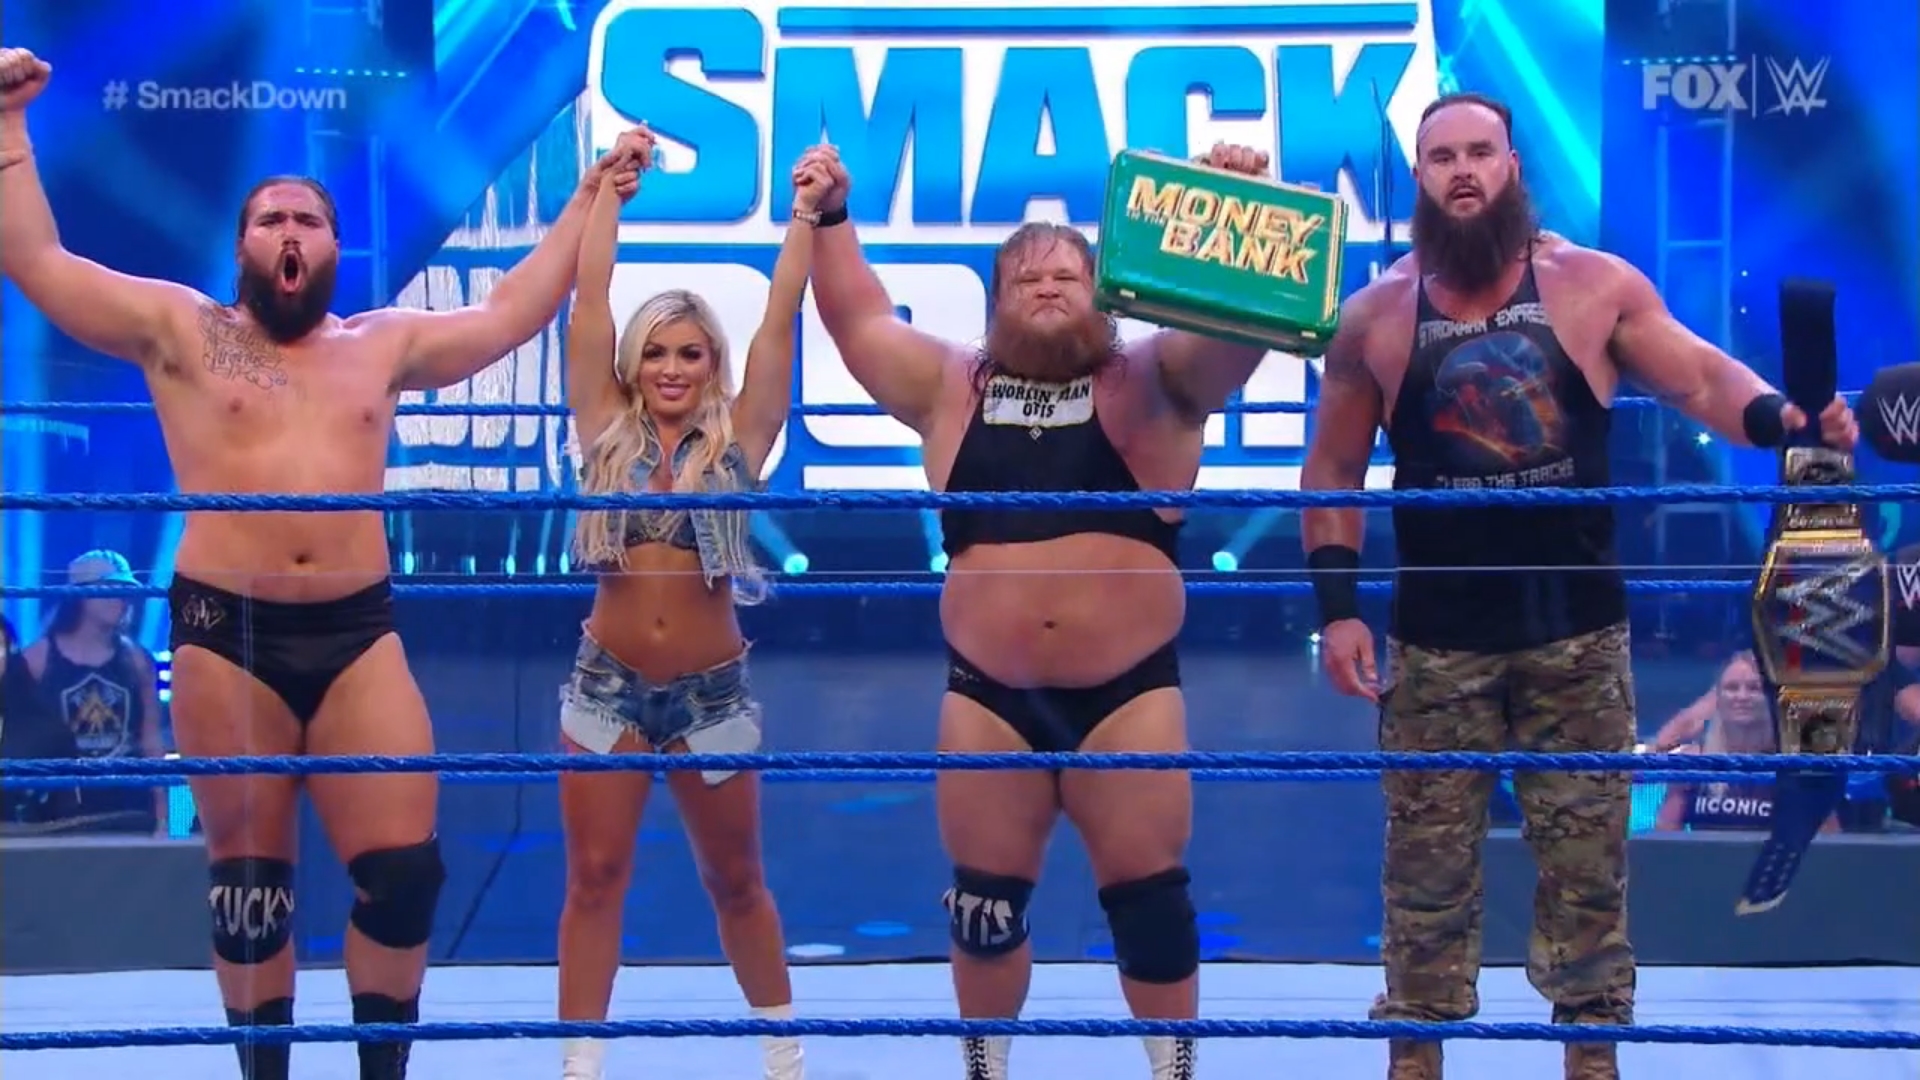 Wwe Friday Night Smackdown Results June 12 2020 Mandy